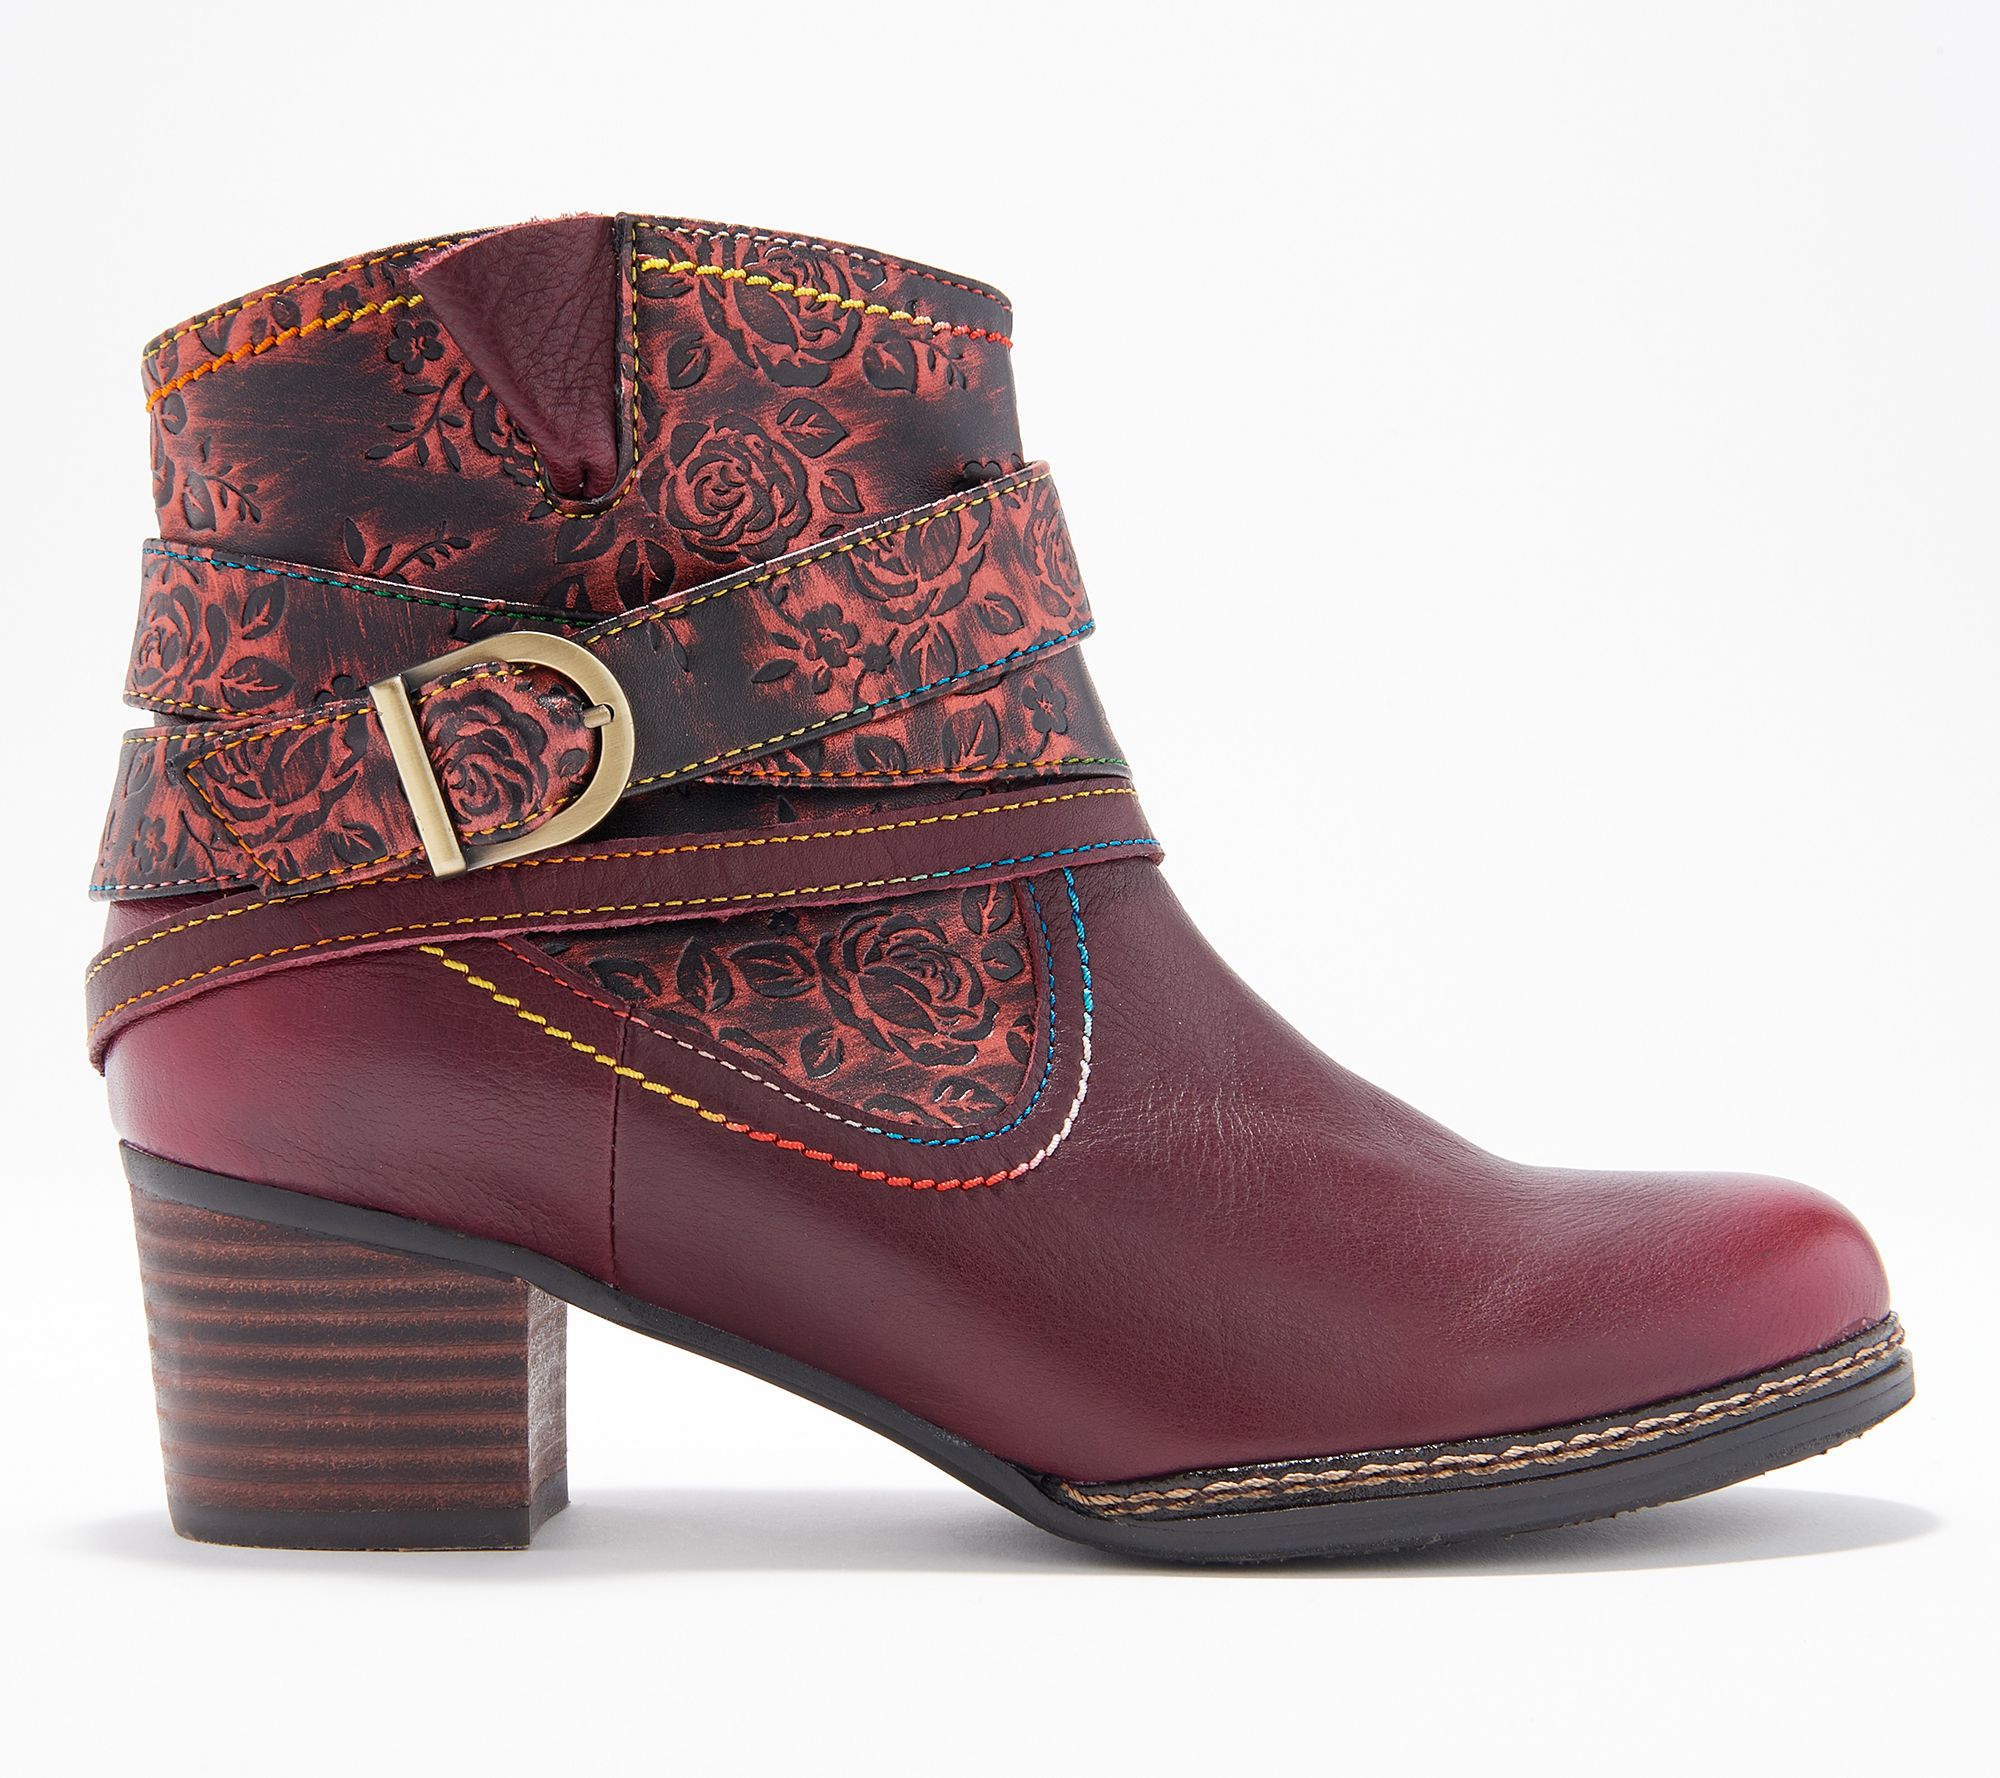 L'Artiste by Spring Step Leather Ankle Boots- Shazzam-Rose - QVC.com